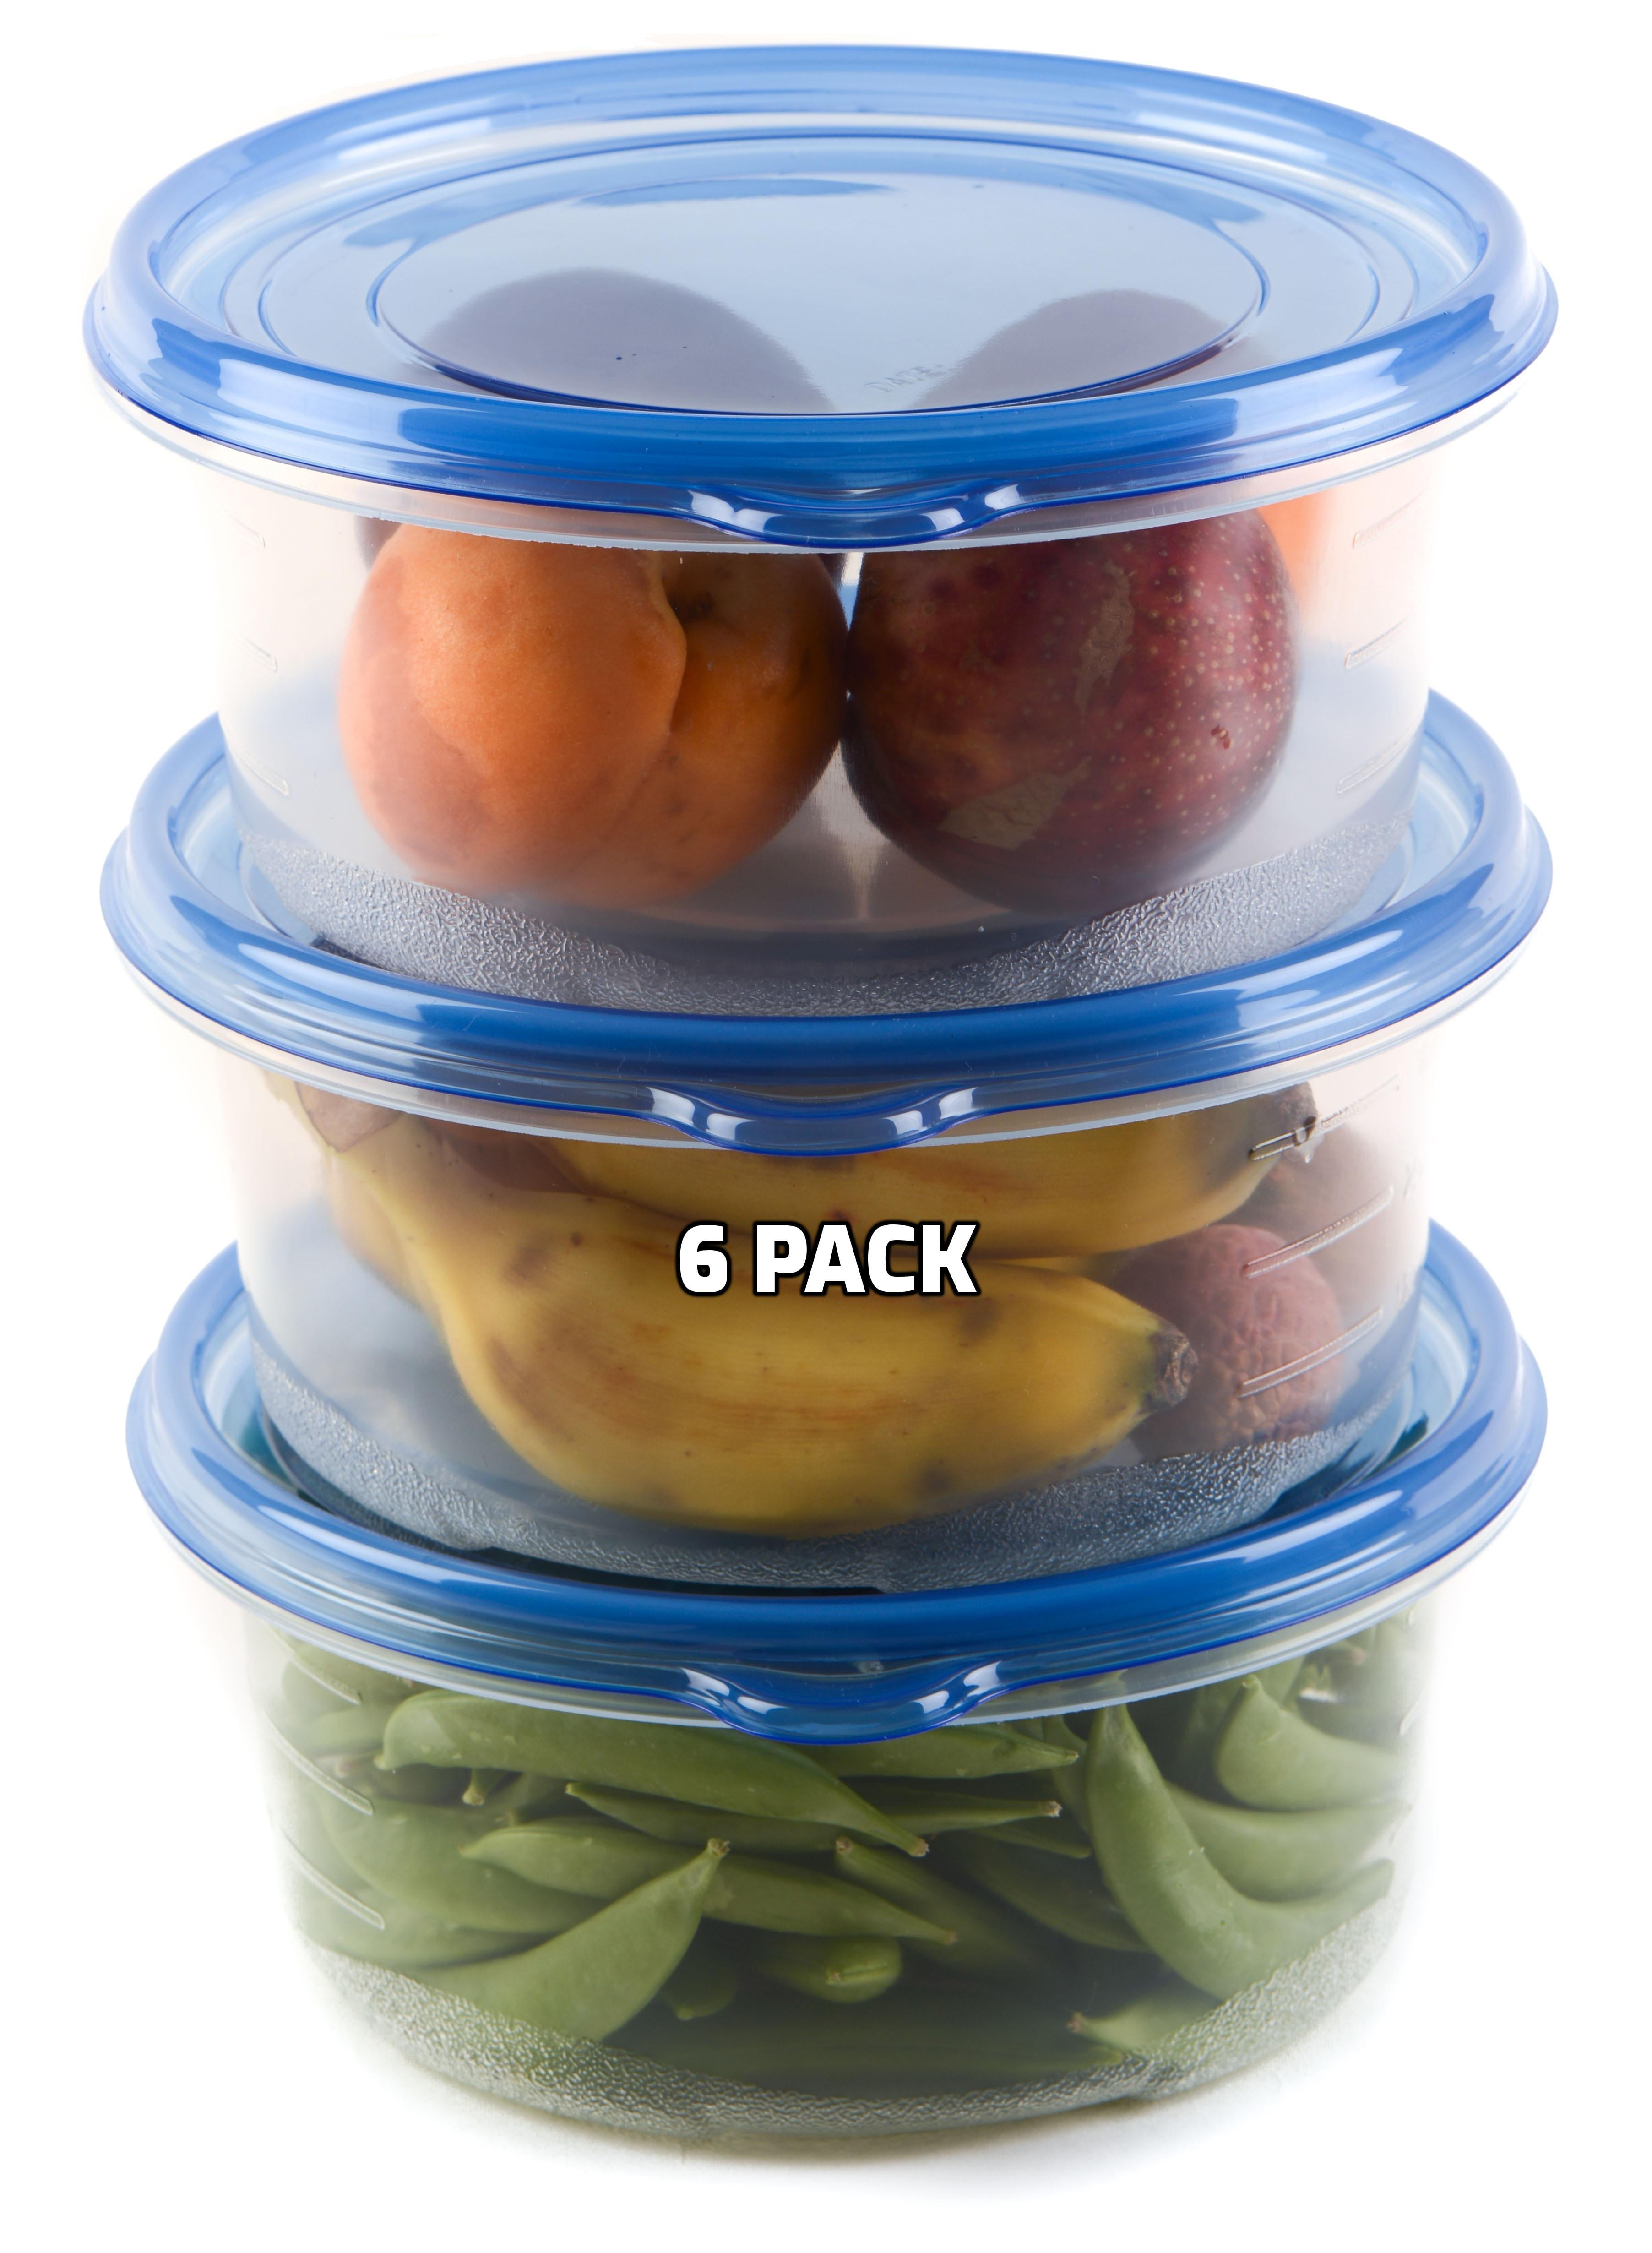 30 PACK] 48oz Round Plastic Reusable Storage Containers with Snap